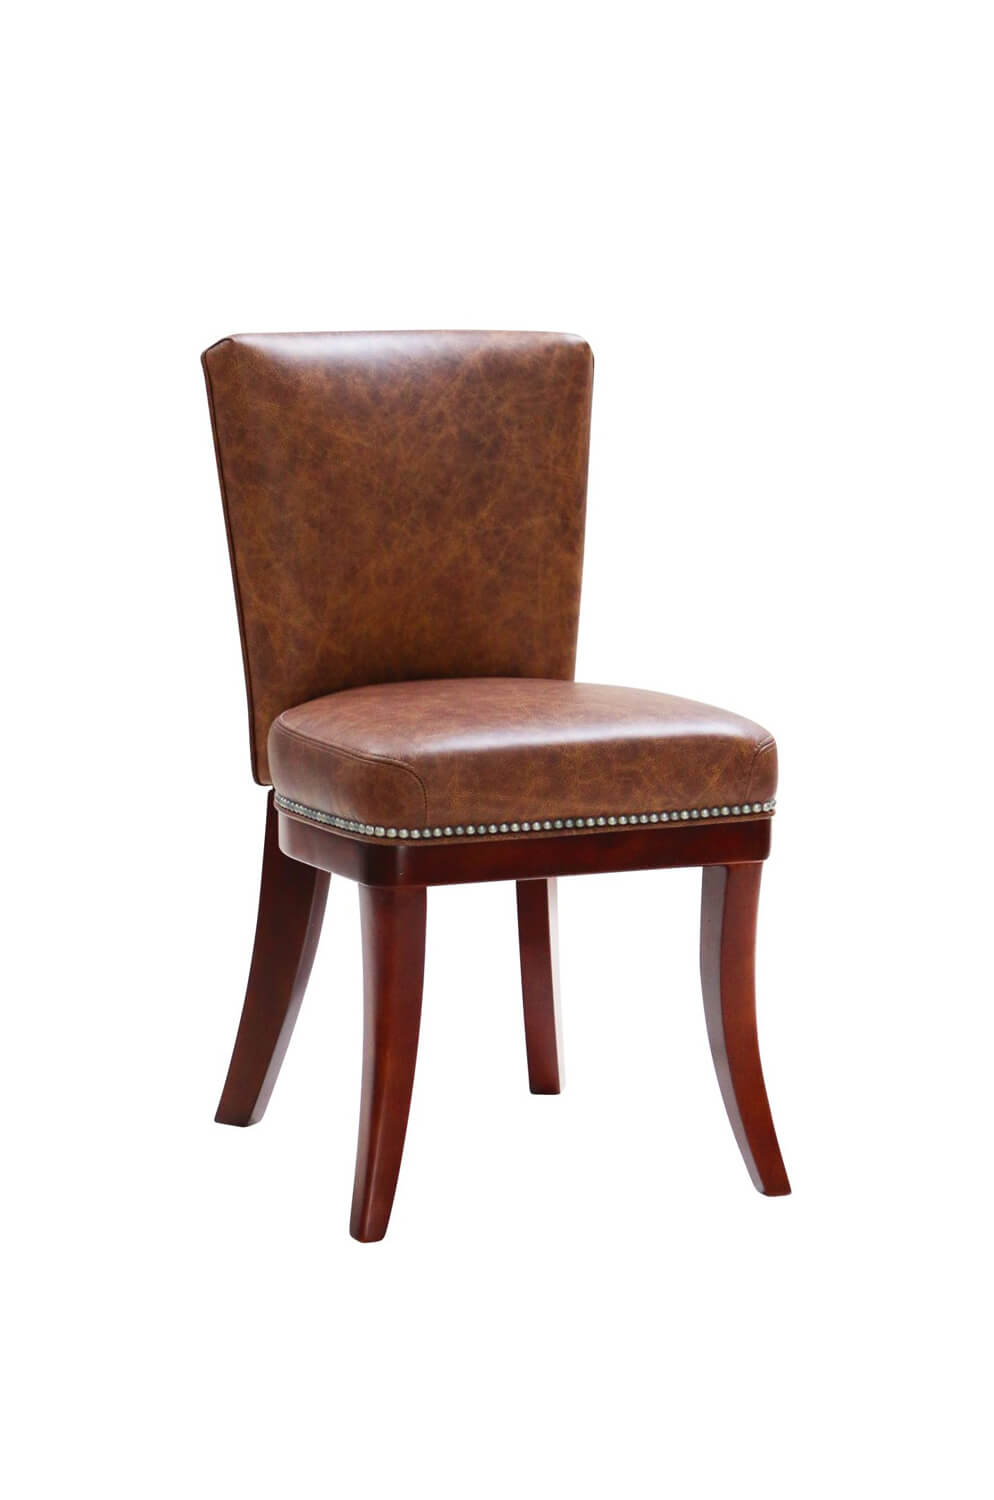 917 Maple Upholstered Club Chair